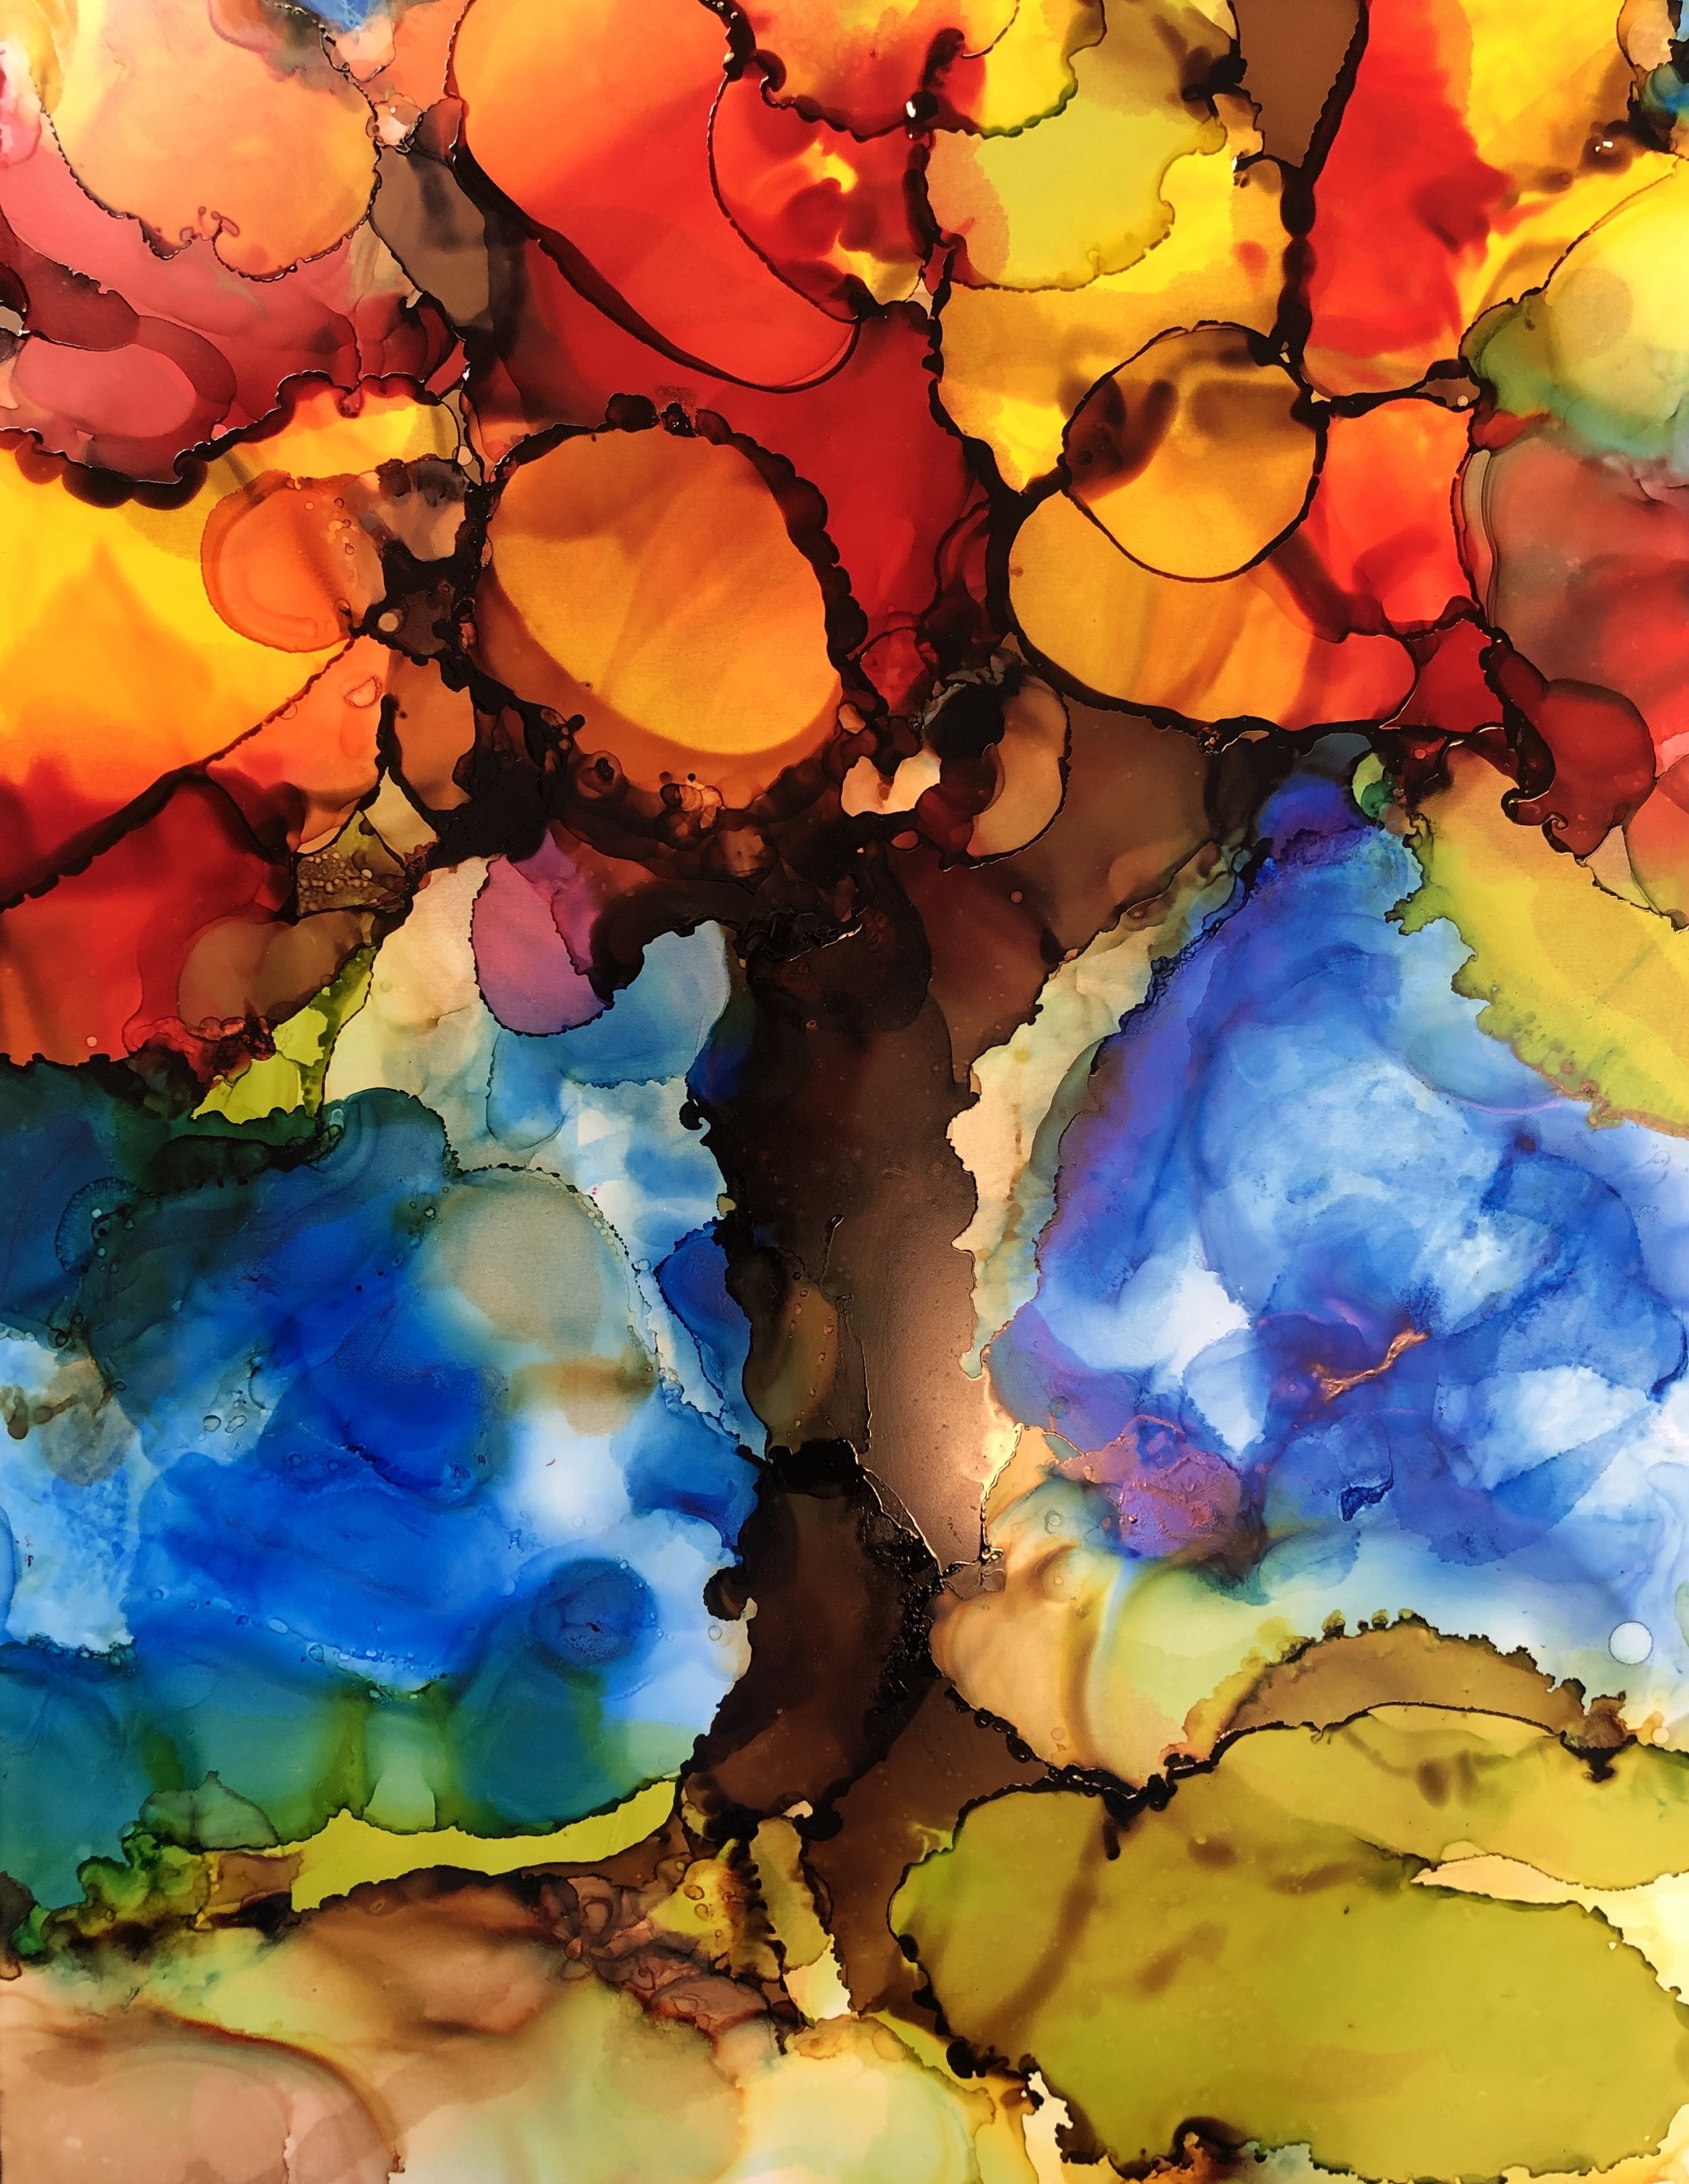 Blue, Orange and White Alcohol Ink Art Graphic by Lazy Sun